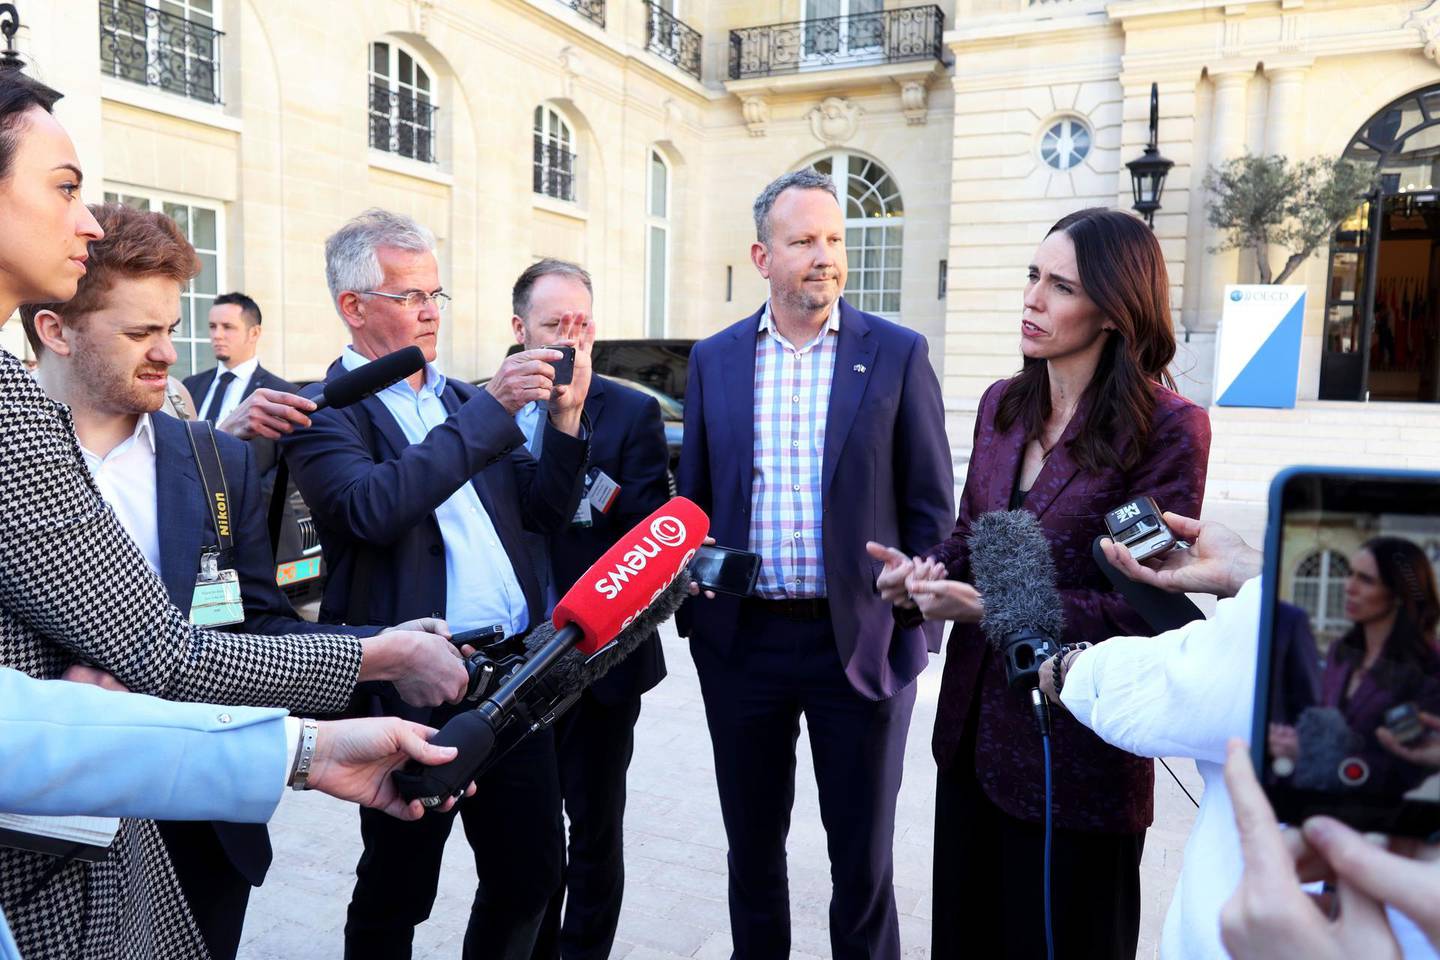 New Zealand Prime Minister Jacinda Ardern, right, gives a press conference, at the OECD headquarters, in Paris, Tuesday, May 14, 2019. The leaders of France and New Zealand will make a joint push to eliminate acts of violent extremism from being shown online, in a meeting with tech leaders in Paris on Wednesday. (AP Photo/Thibault Camus)